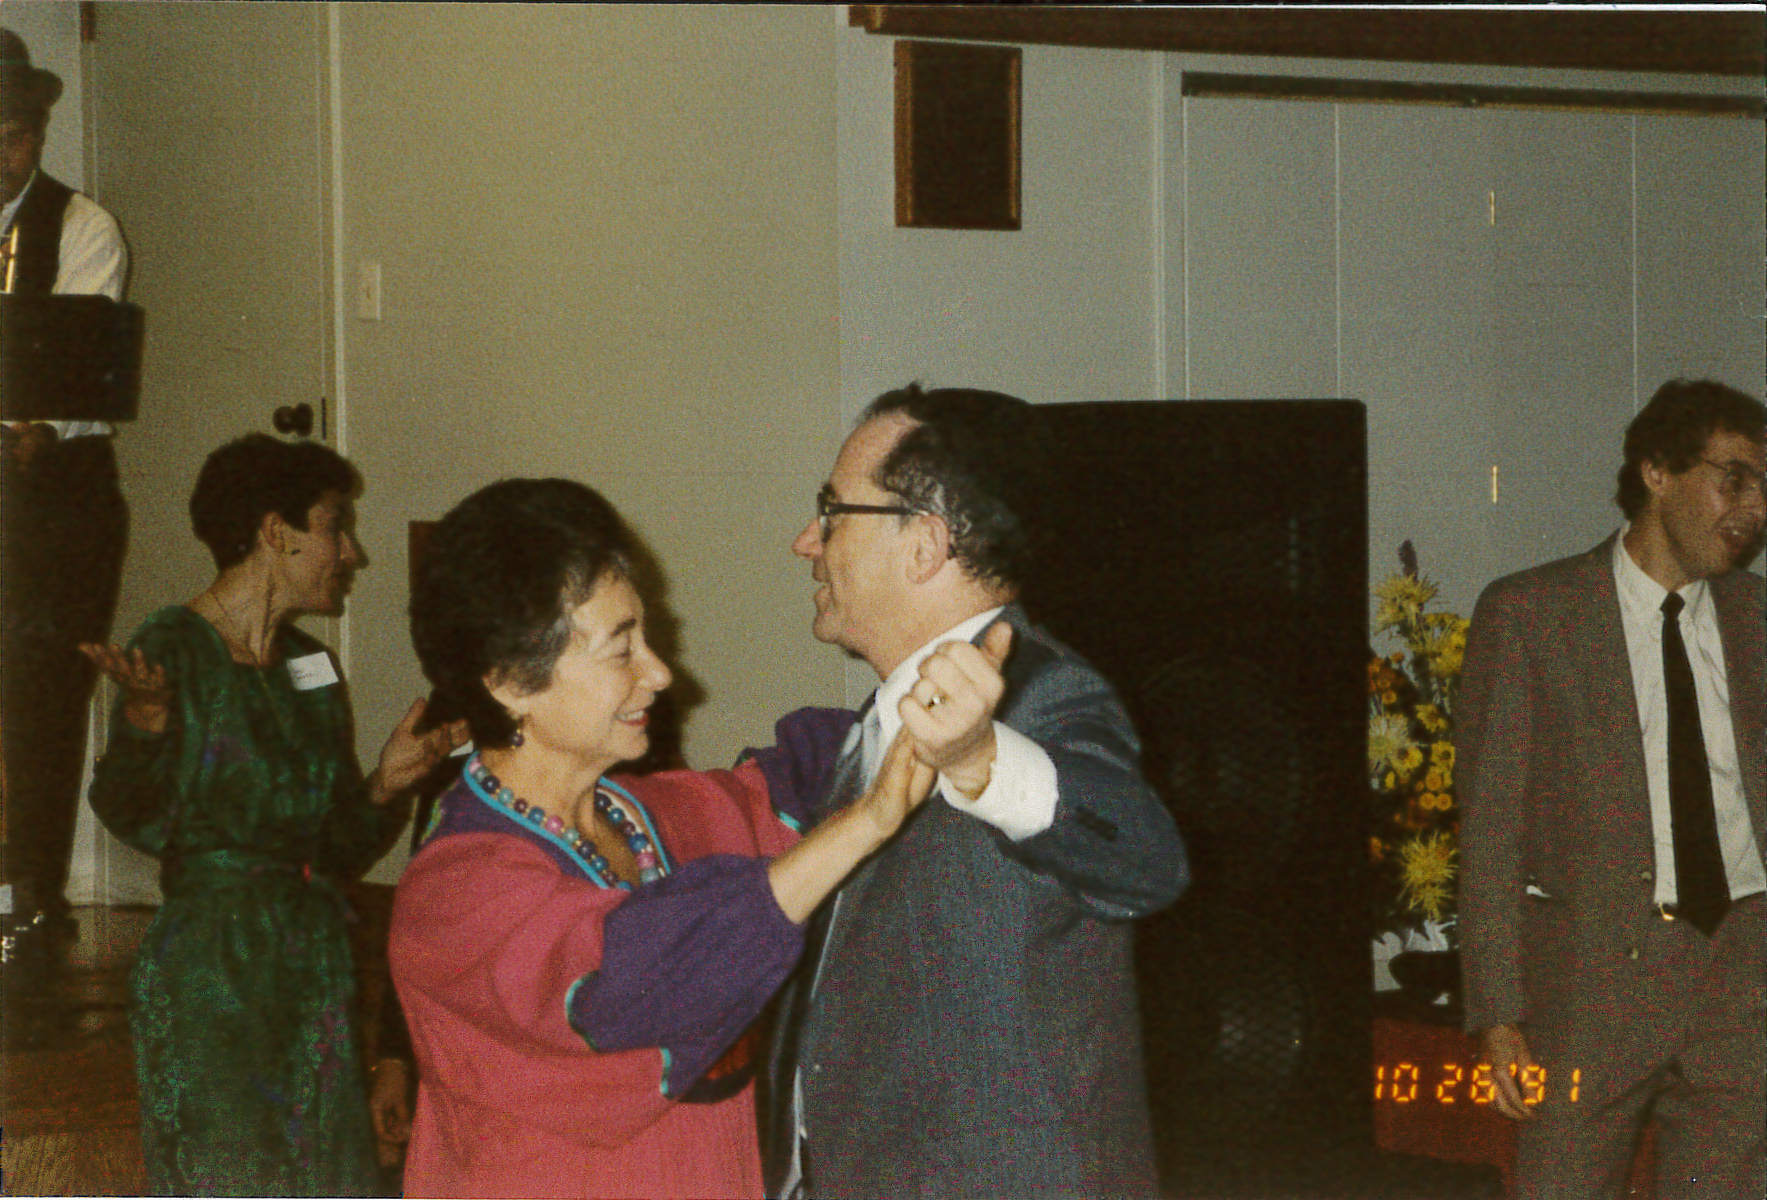 Monroe and Daryl Hafter dancing at the 75th anniversary celebration, 10/26/91.